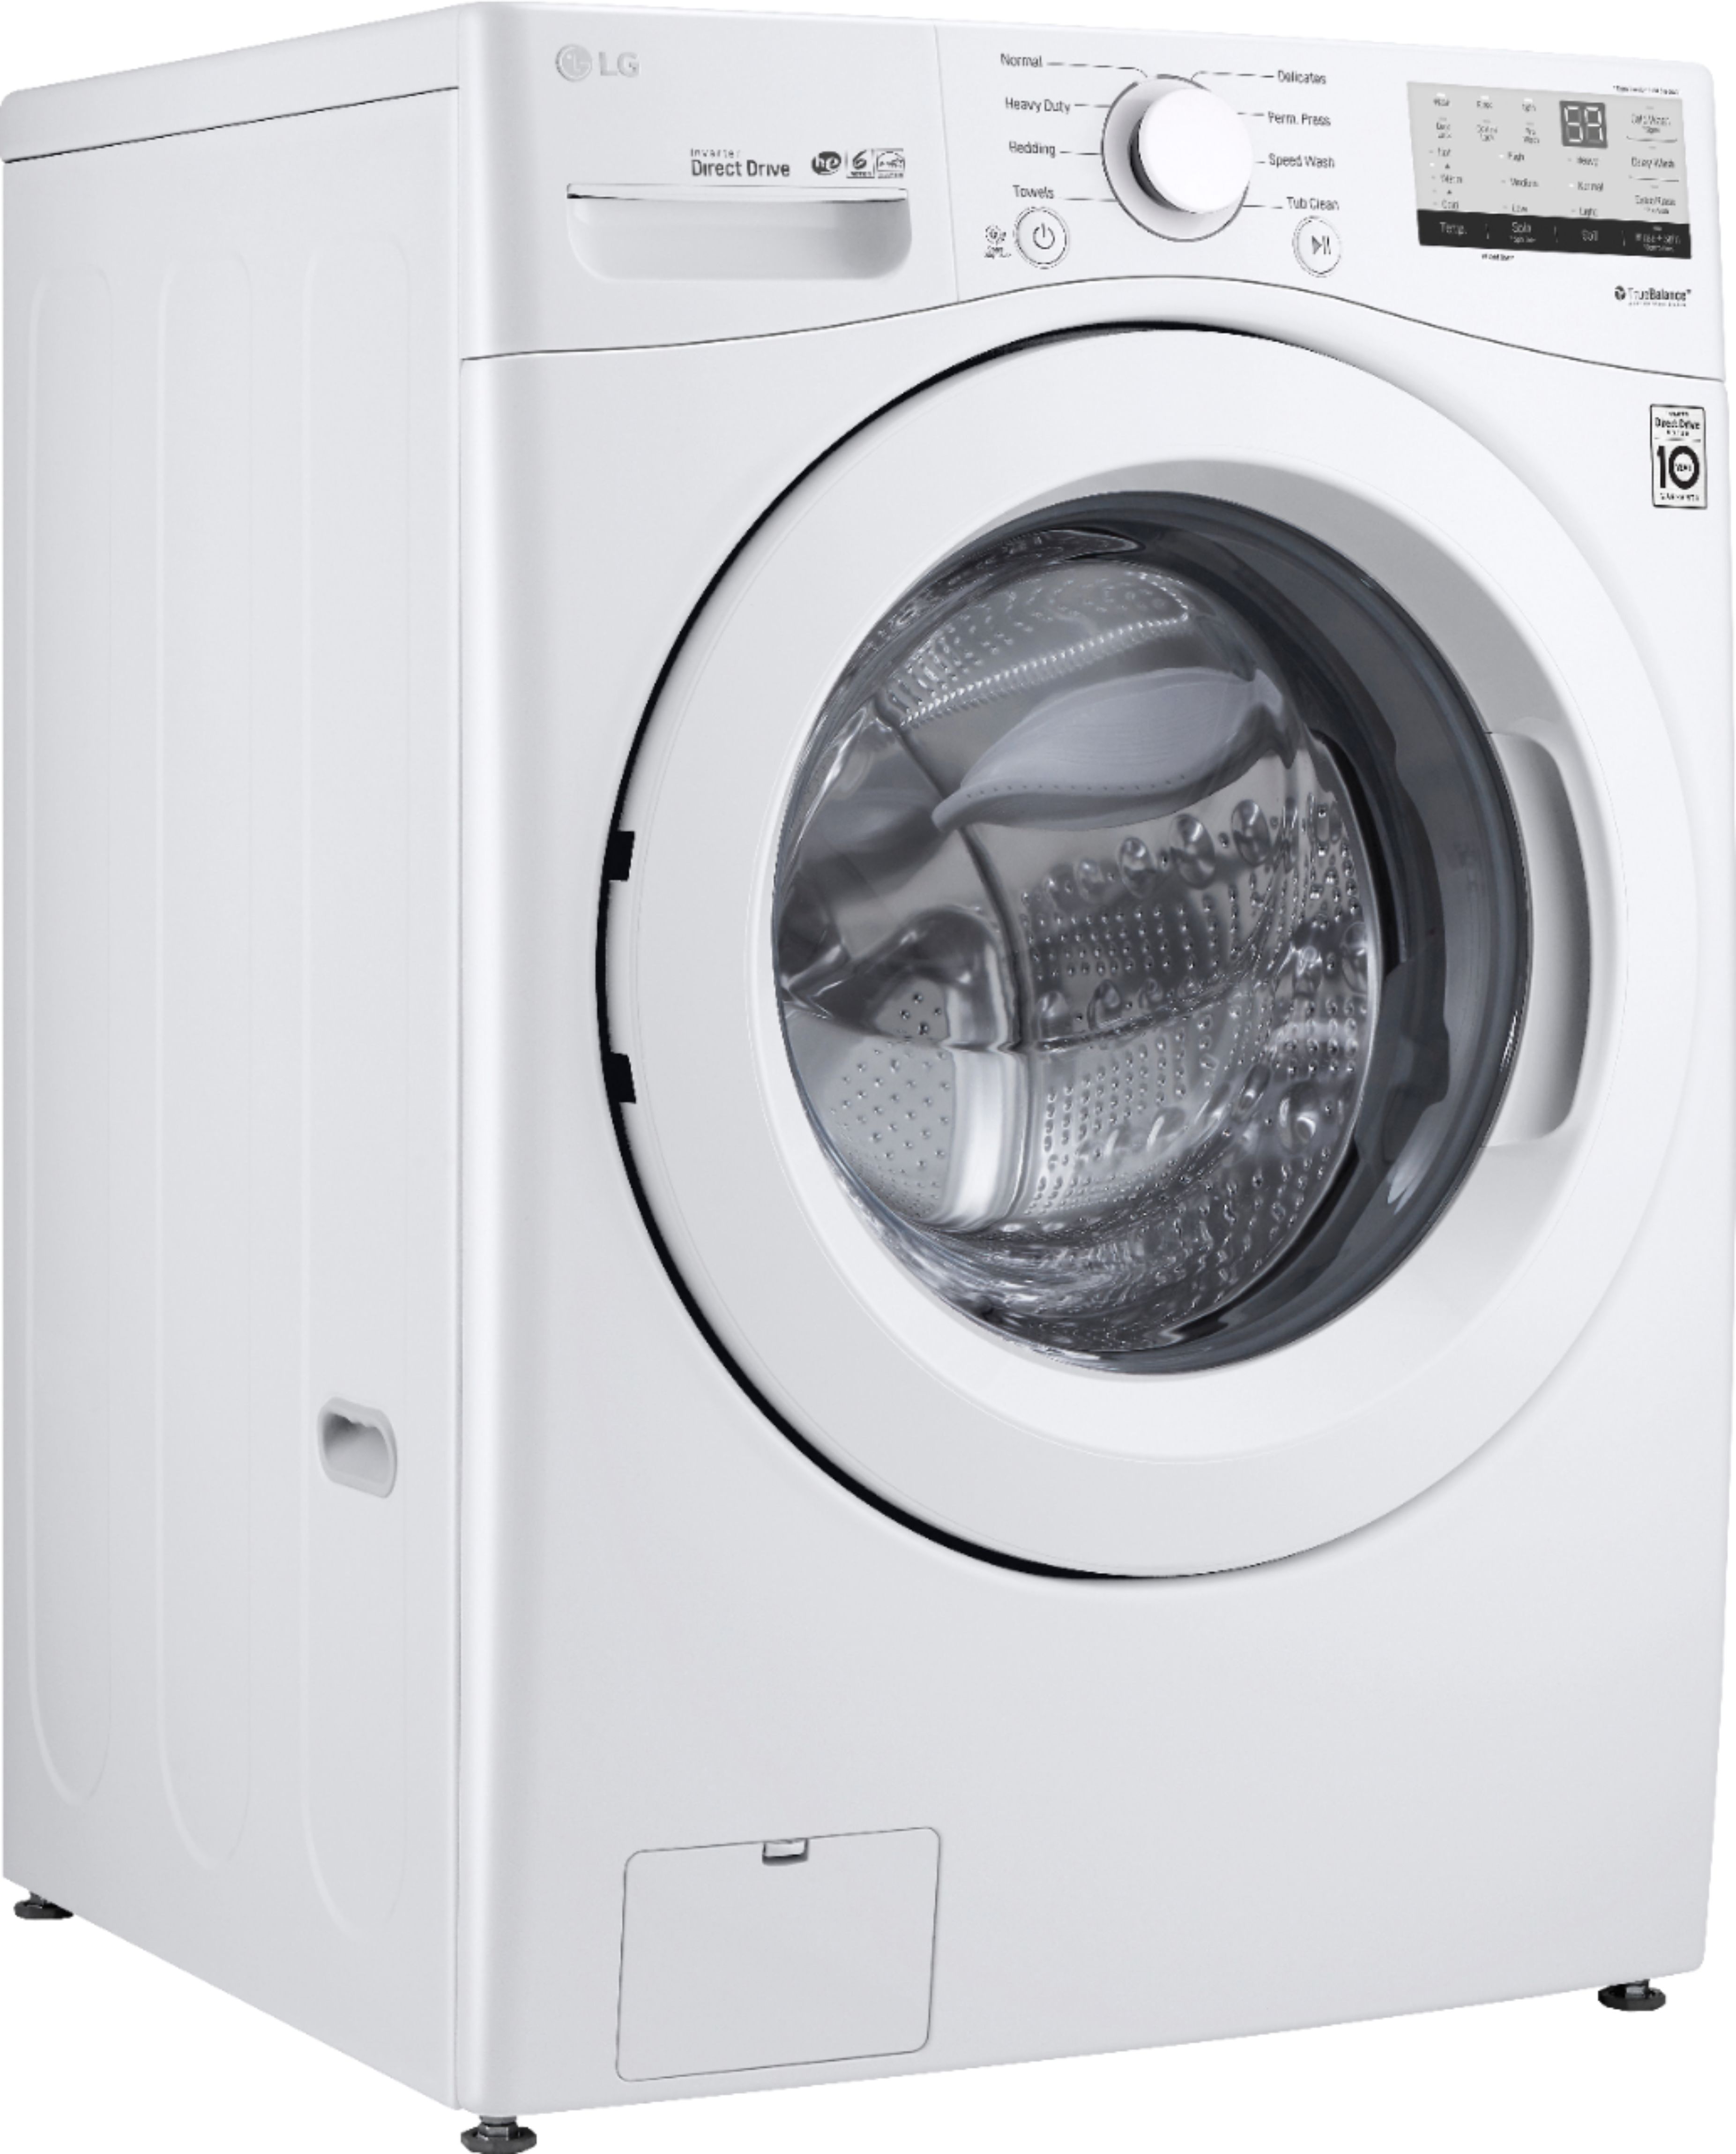 Angle View: Samsung - 4.5 Cu. Ft. High-Efficiency Stackable Smart Front Load Washer with Steam and Super Speed Wash - Champagne